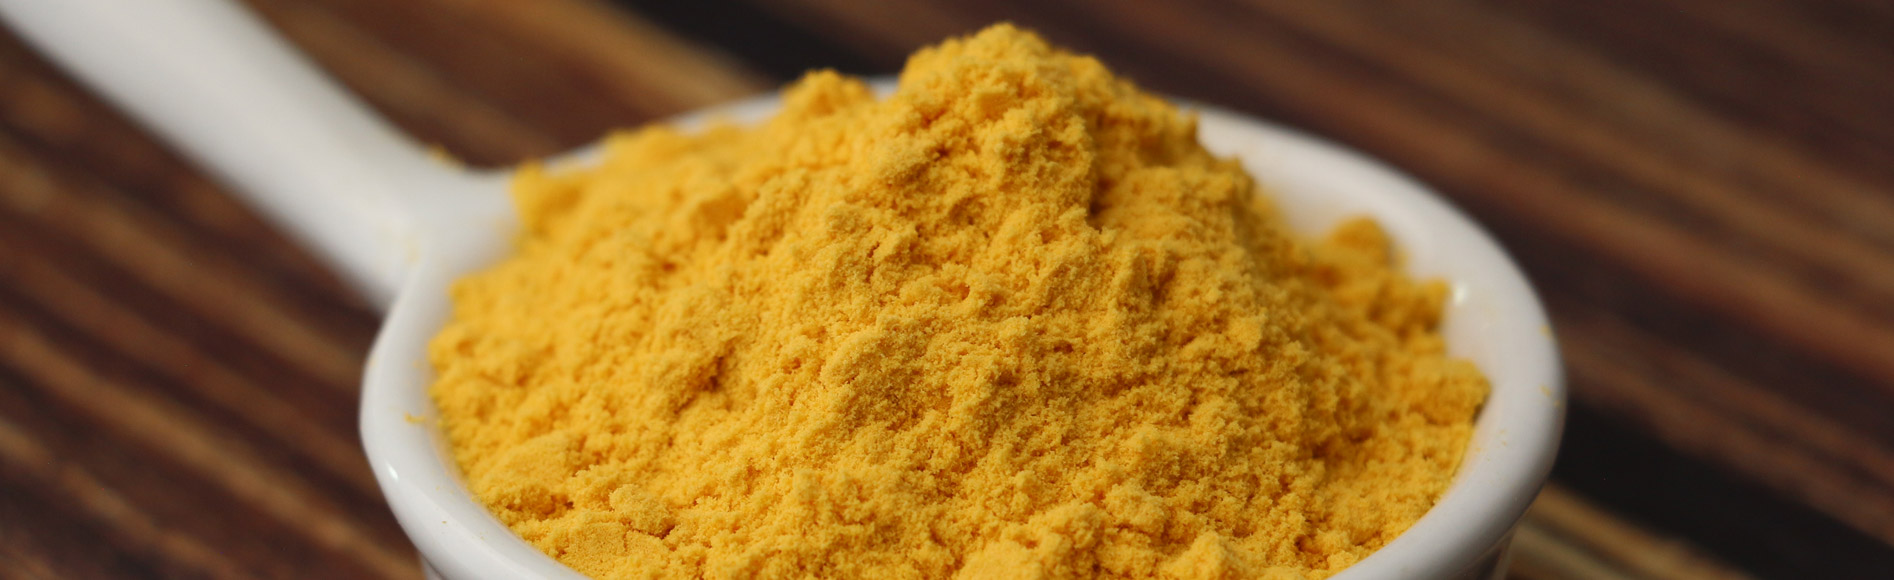 Instant Sea Buckthorn Powder Beautiful color product powder